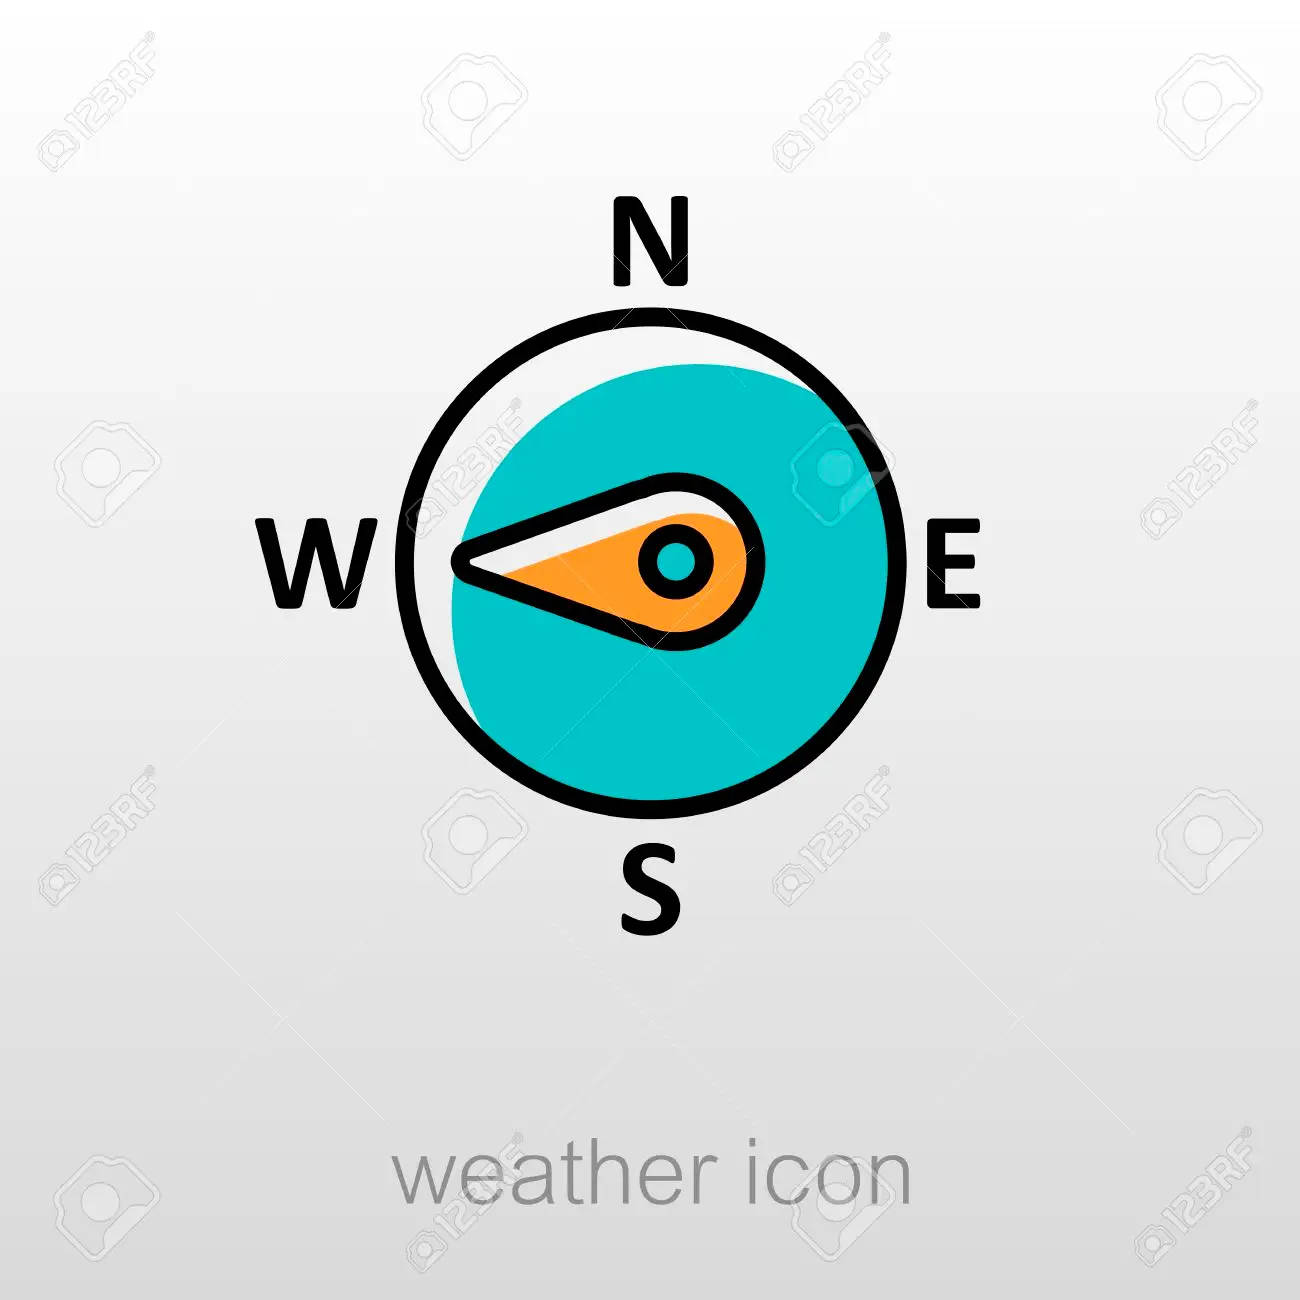 West Weather Icon Wallpaper